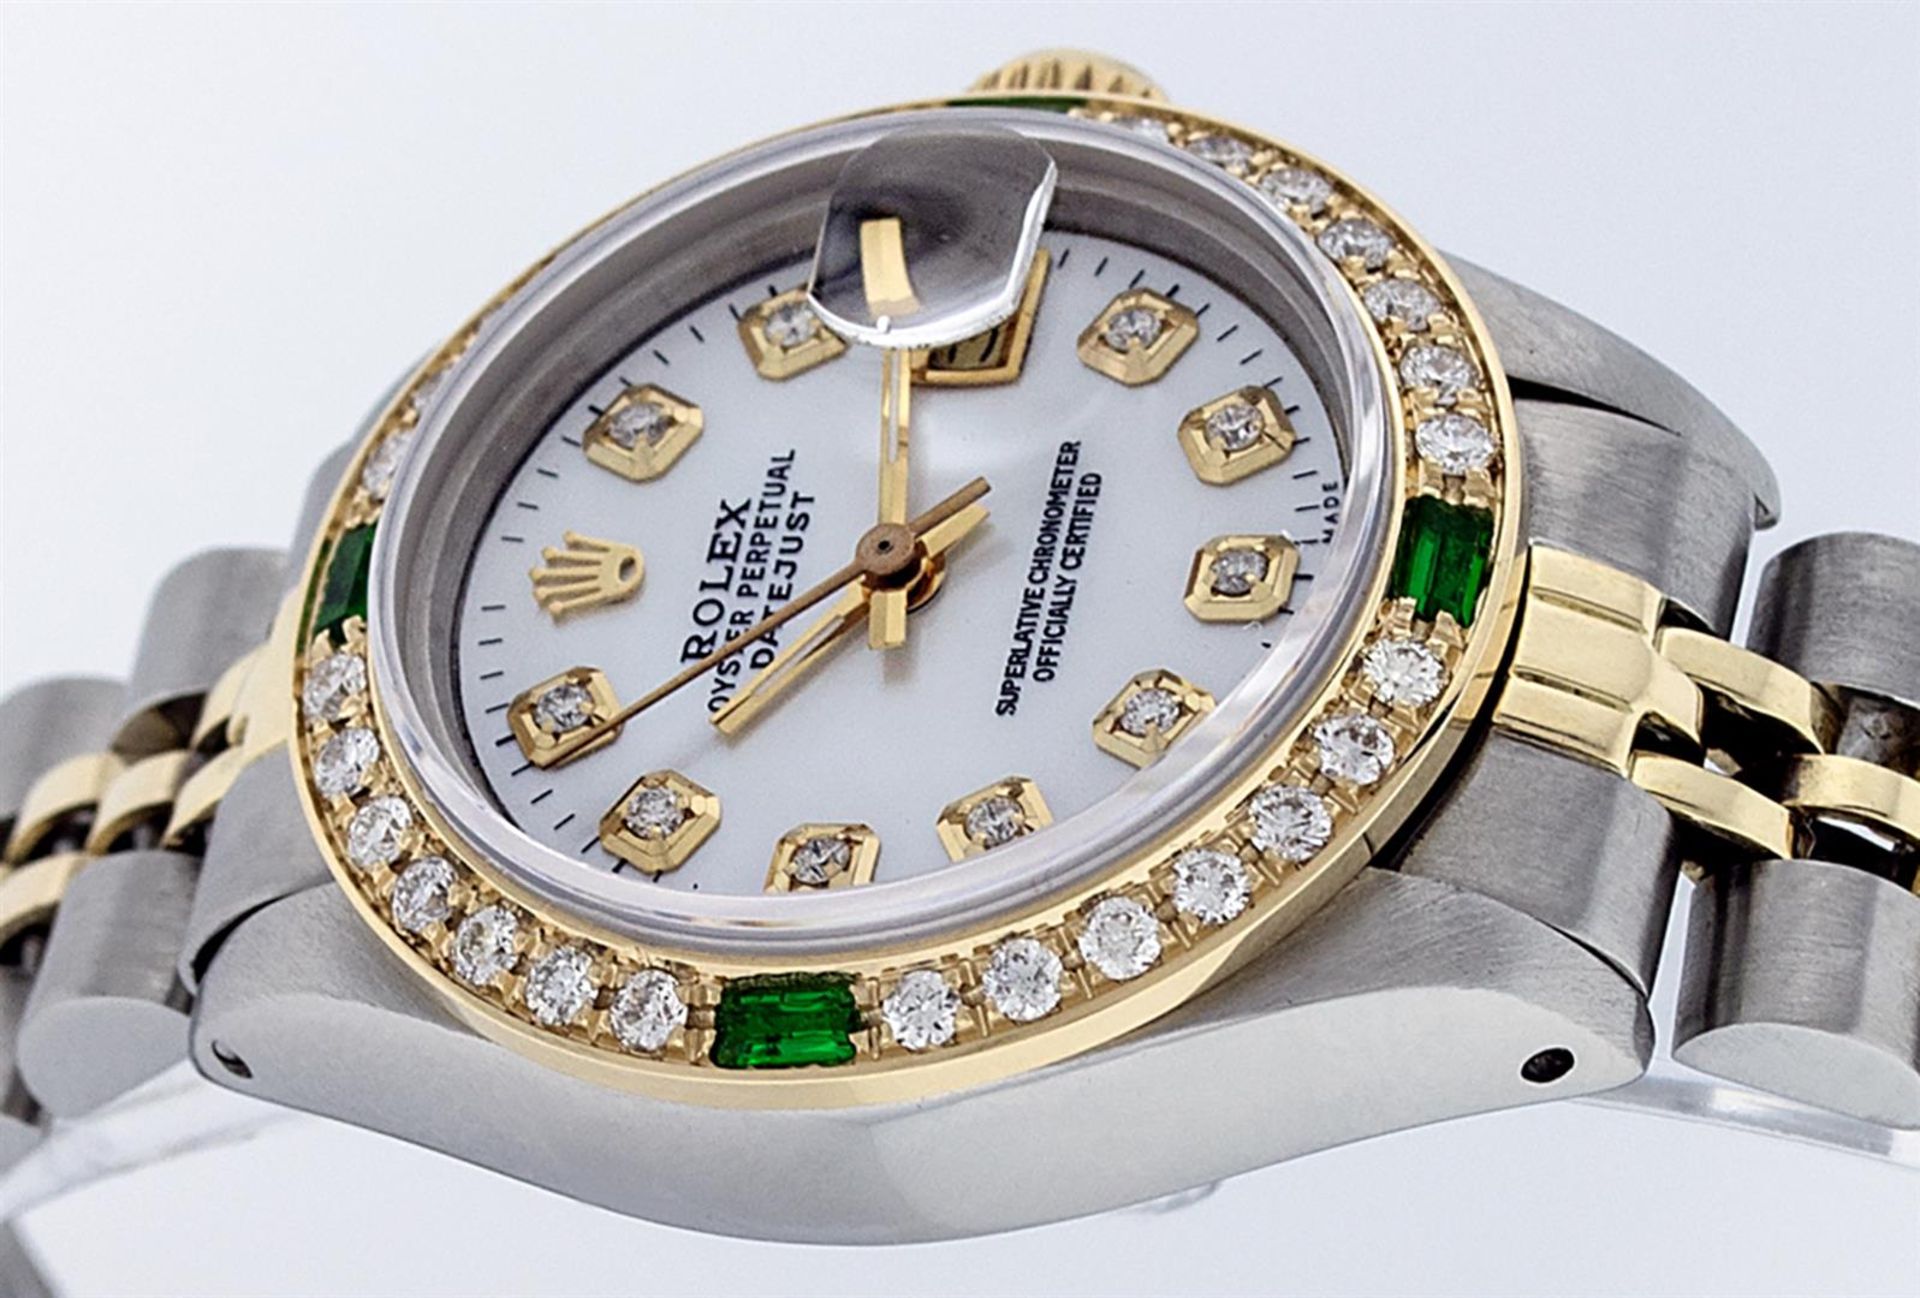 Rolex Ladies 2T White Diamond & Emerald Oyster Perpetual Datejust Wristwatch - Image 3 of 9